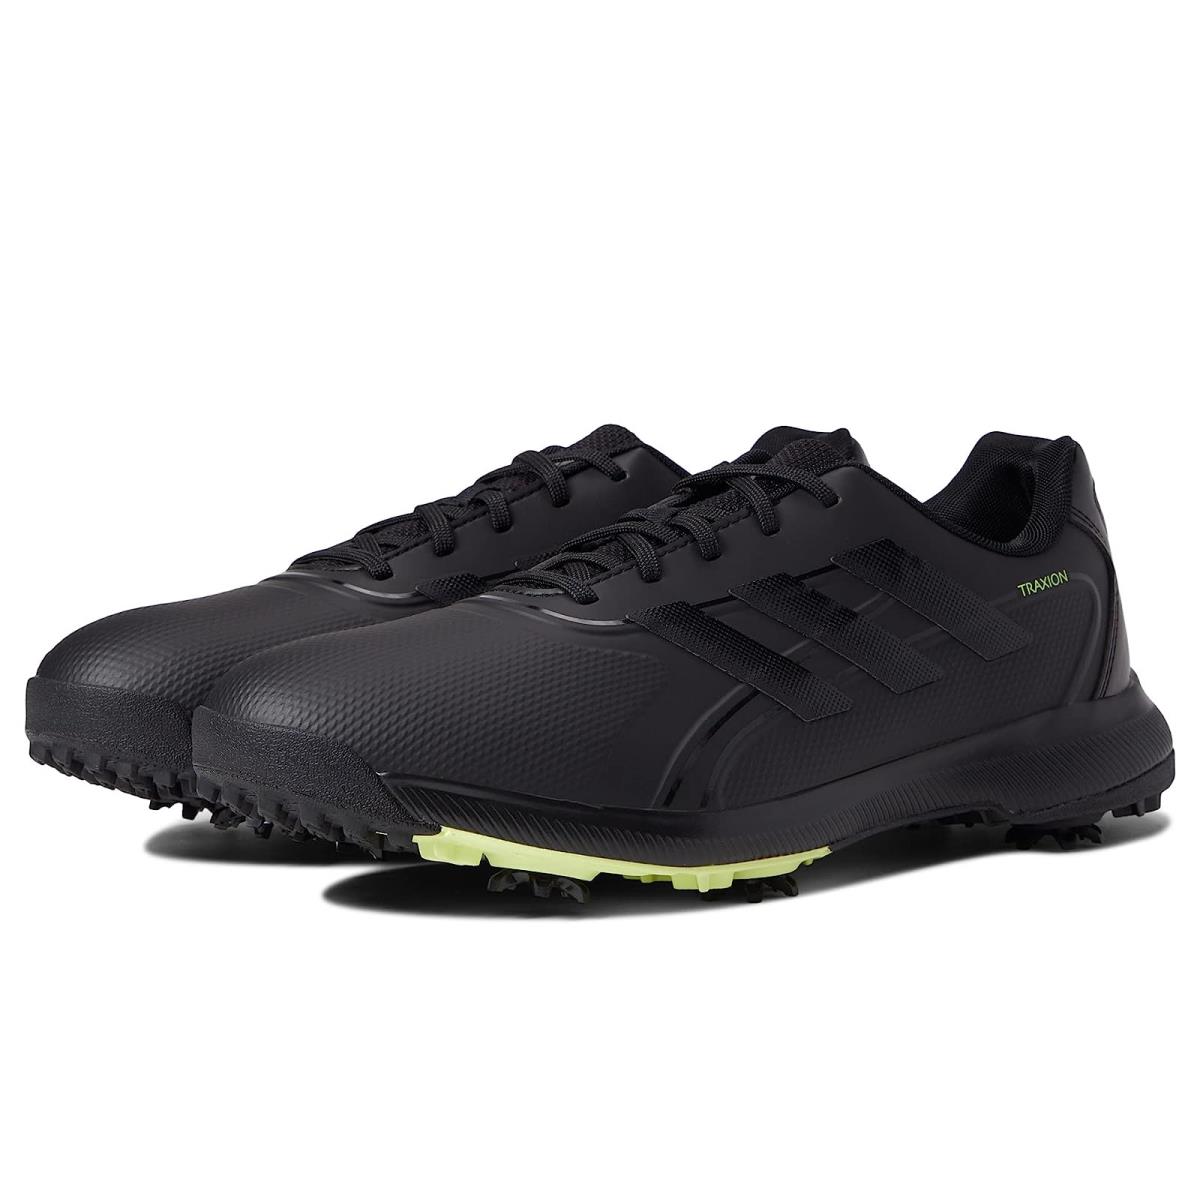 Man`s Sneakers Athletic Shoes Adidas Golf Traxion Lite Max Core Black/Footwear White/Pulse Lime